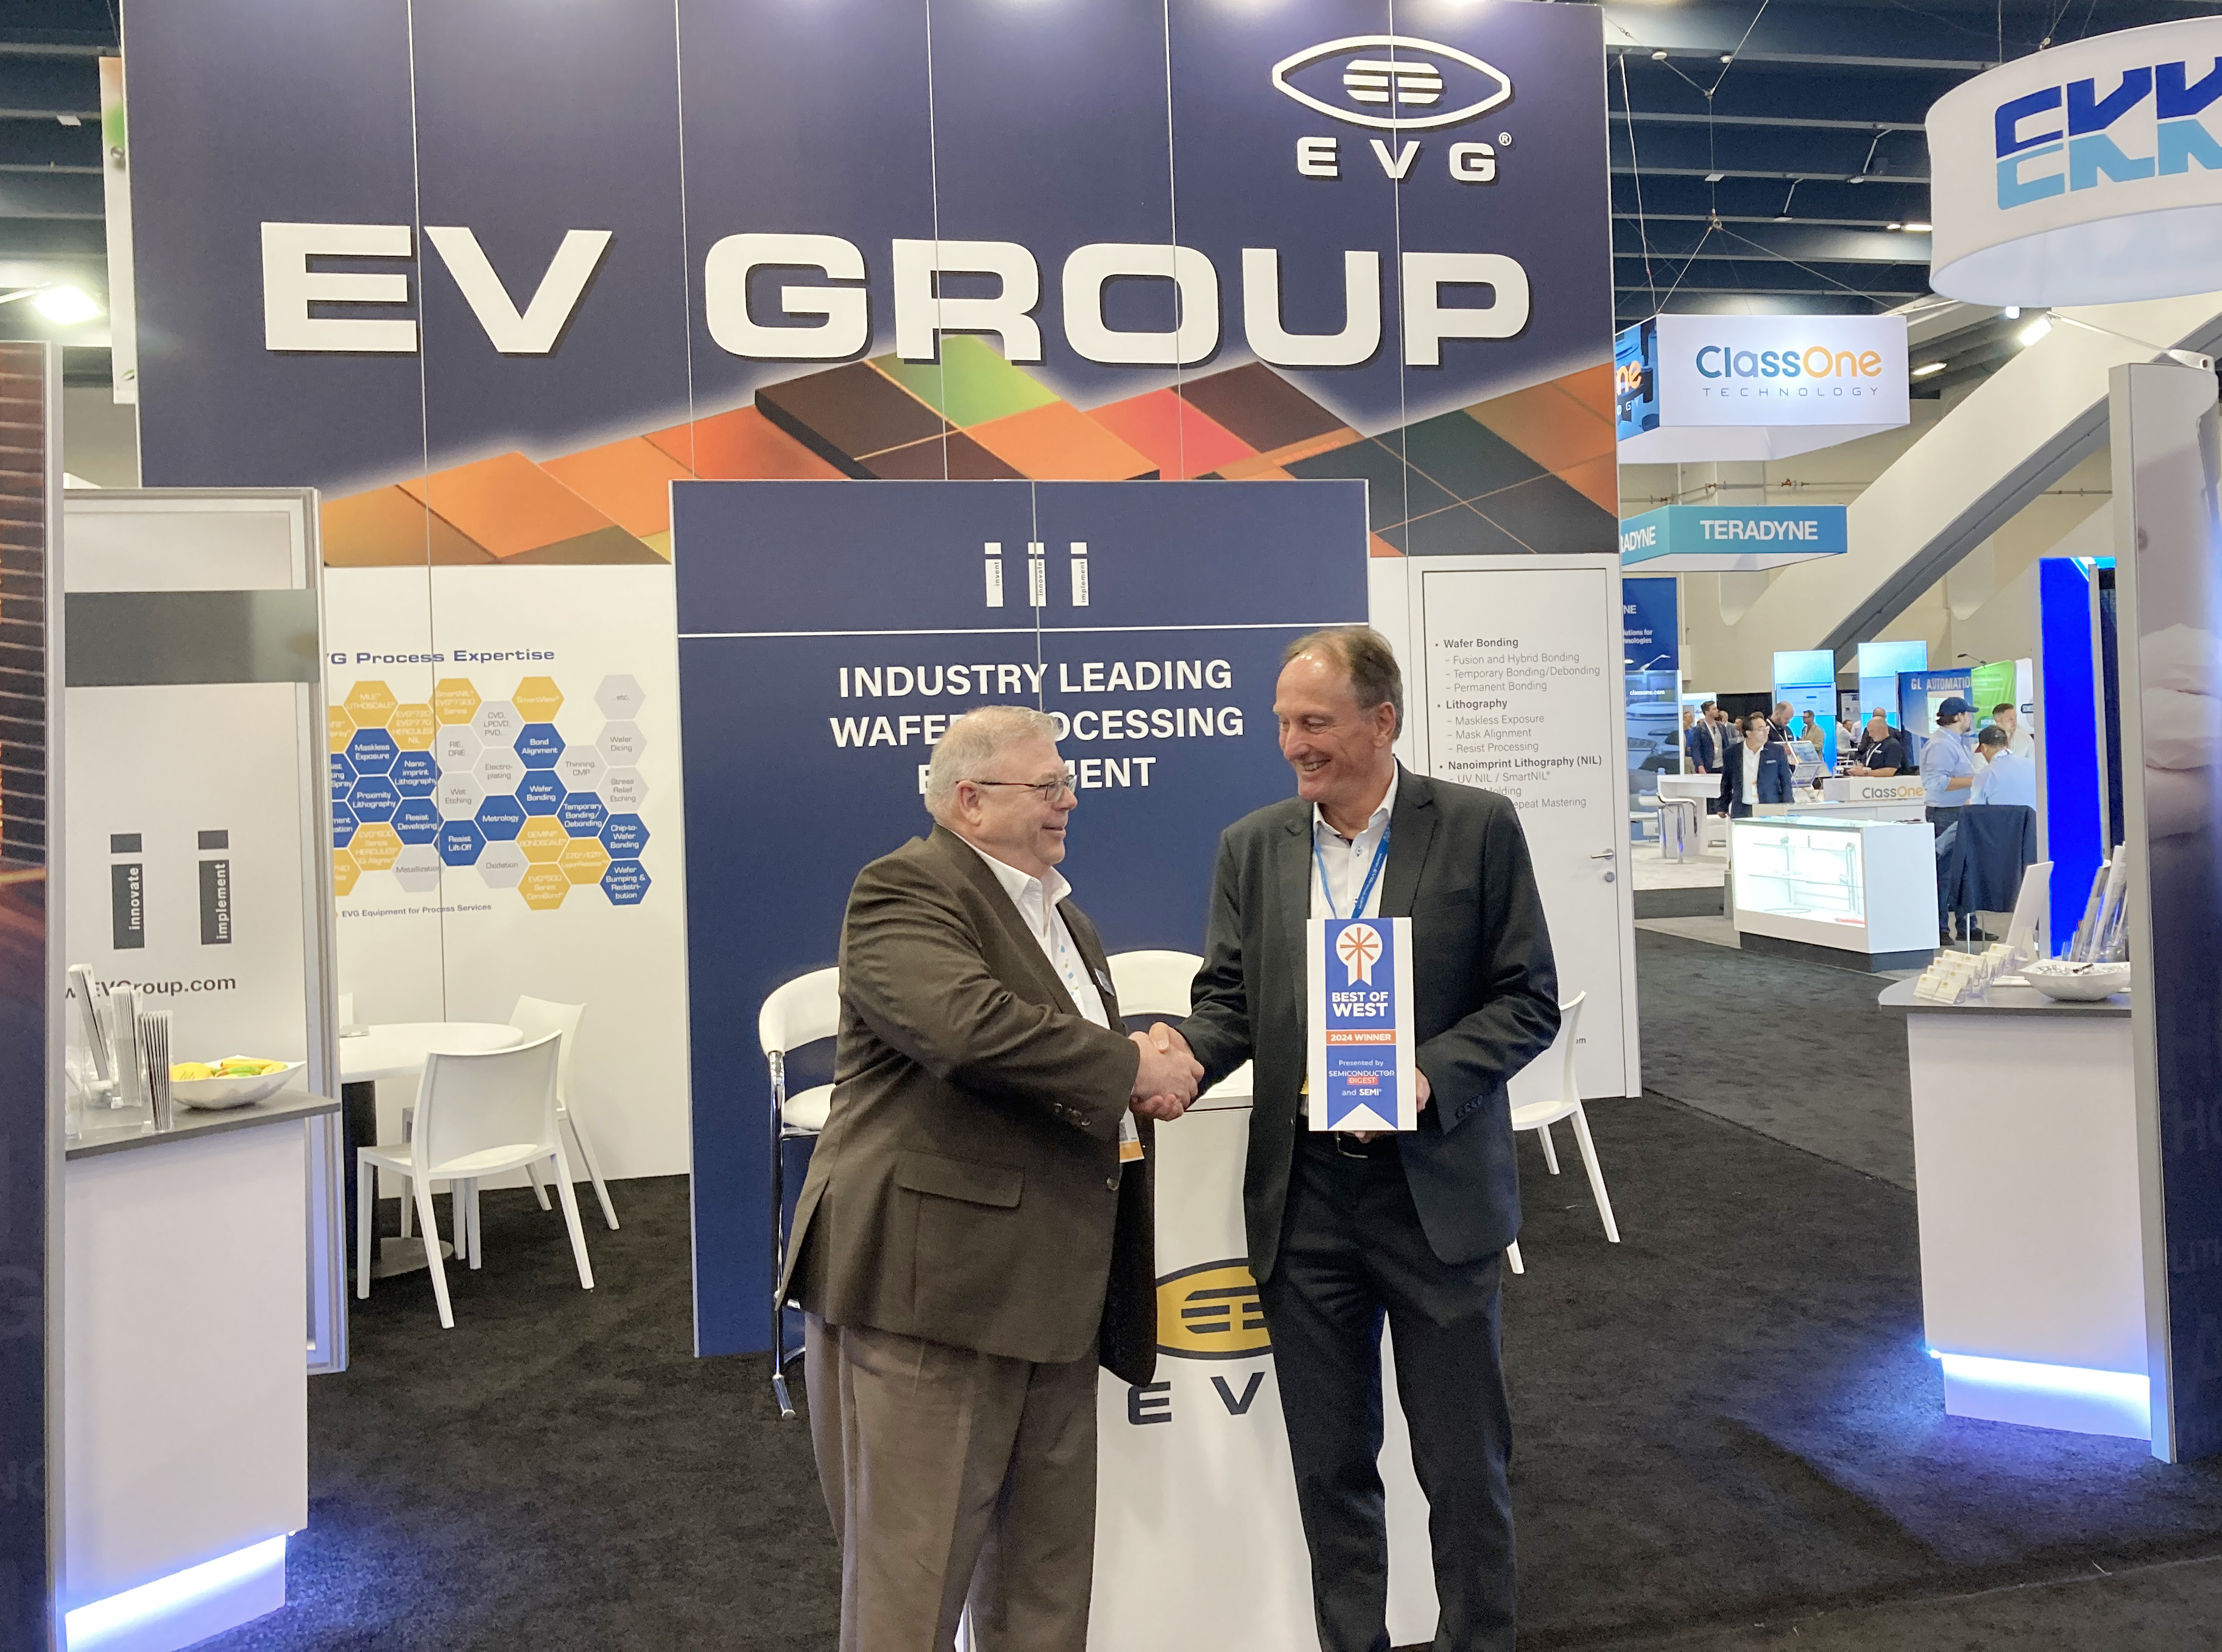 Semiconductor Digest's Editor-in-Chief Peter Singer handing over the award to EVG's Executive Sales & Customer Support Director Hermann Waltl.